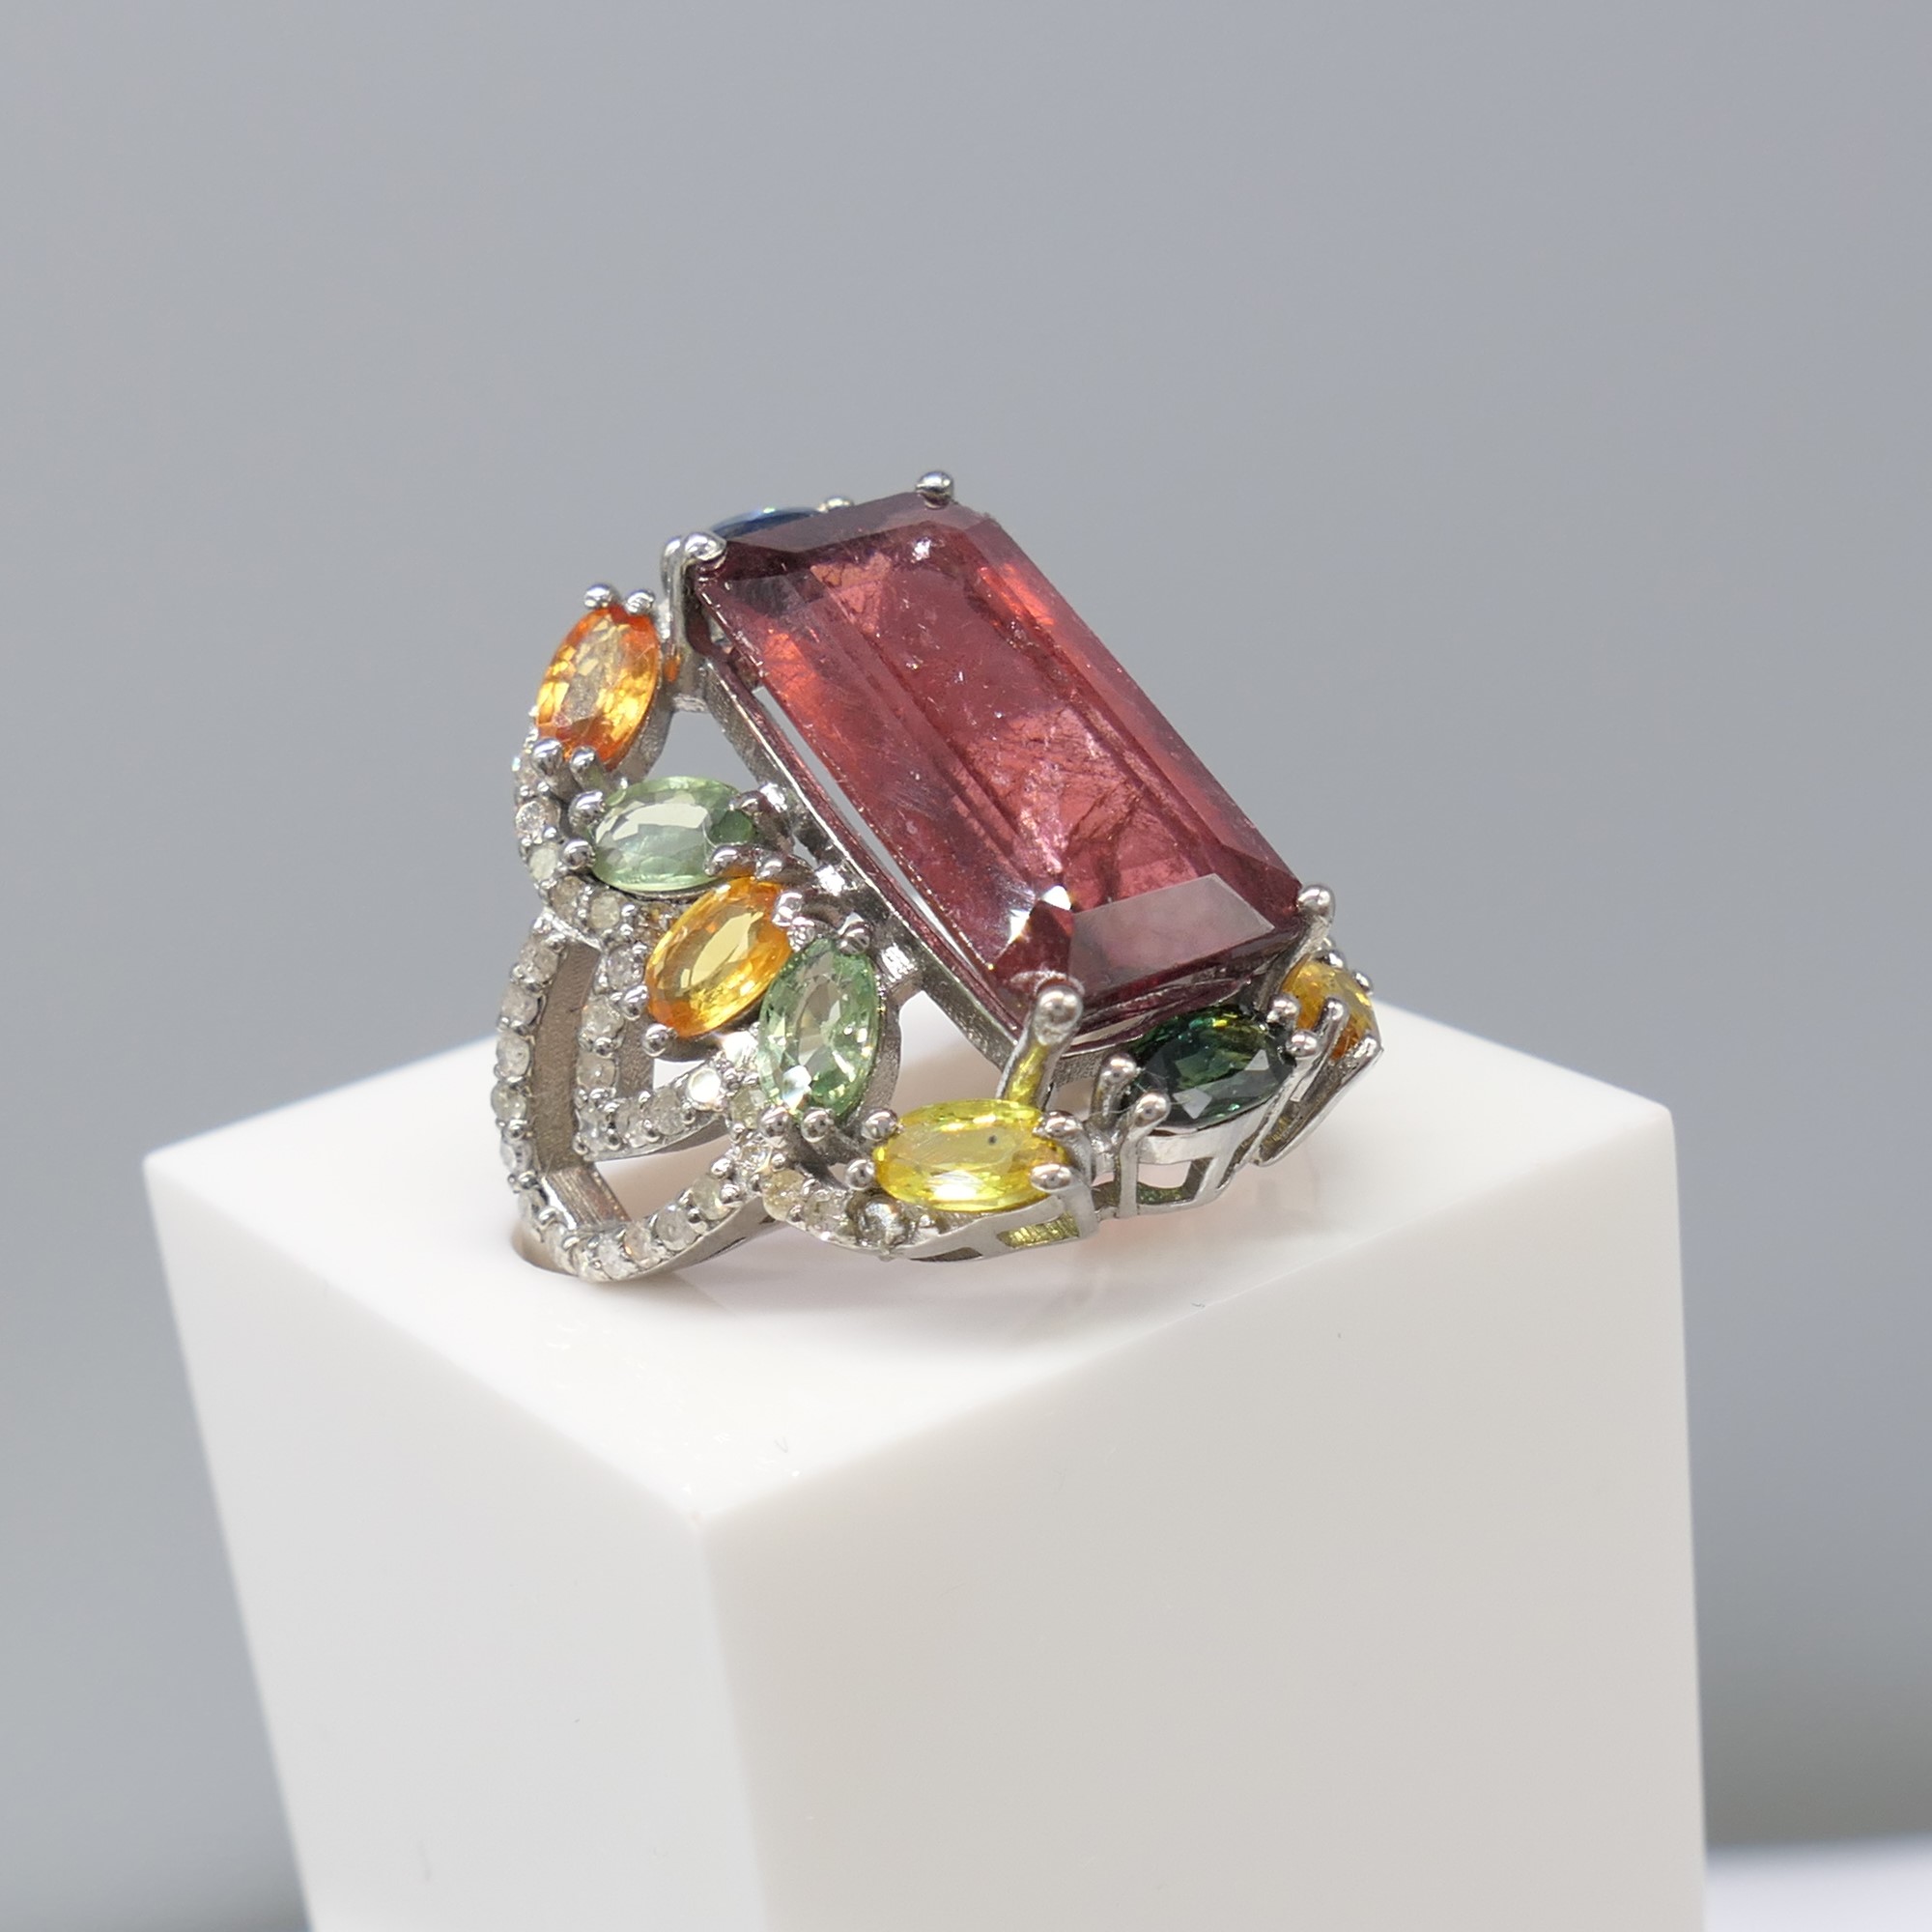 Large Dress Ring Set With Tourmaline, Multi-Coloured Sapphires and Diamonds - Image 3 of 7